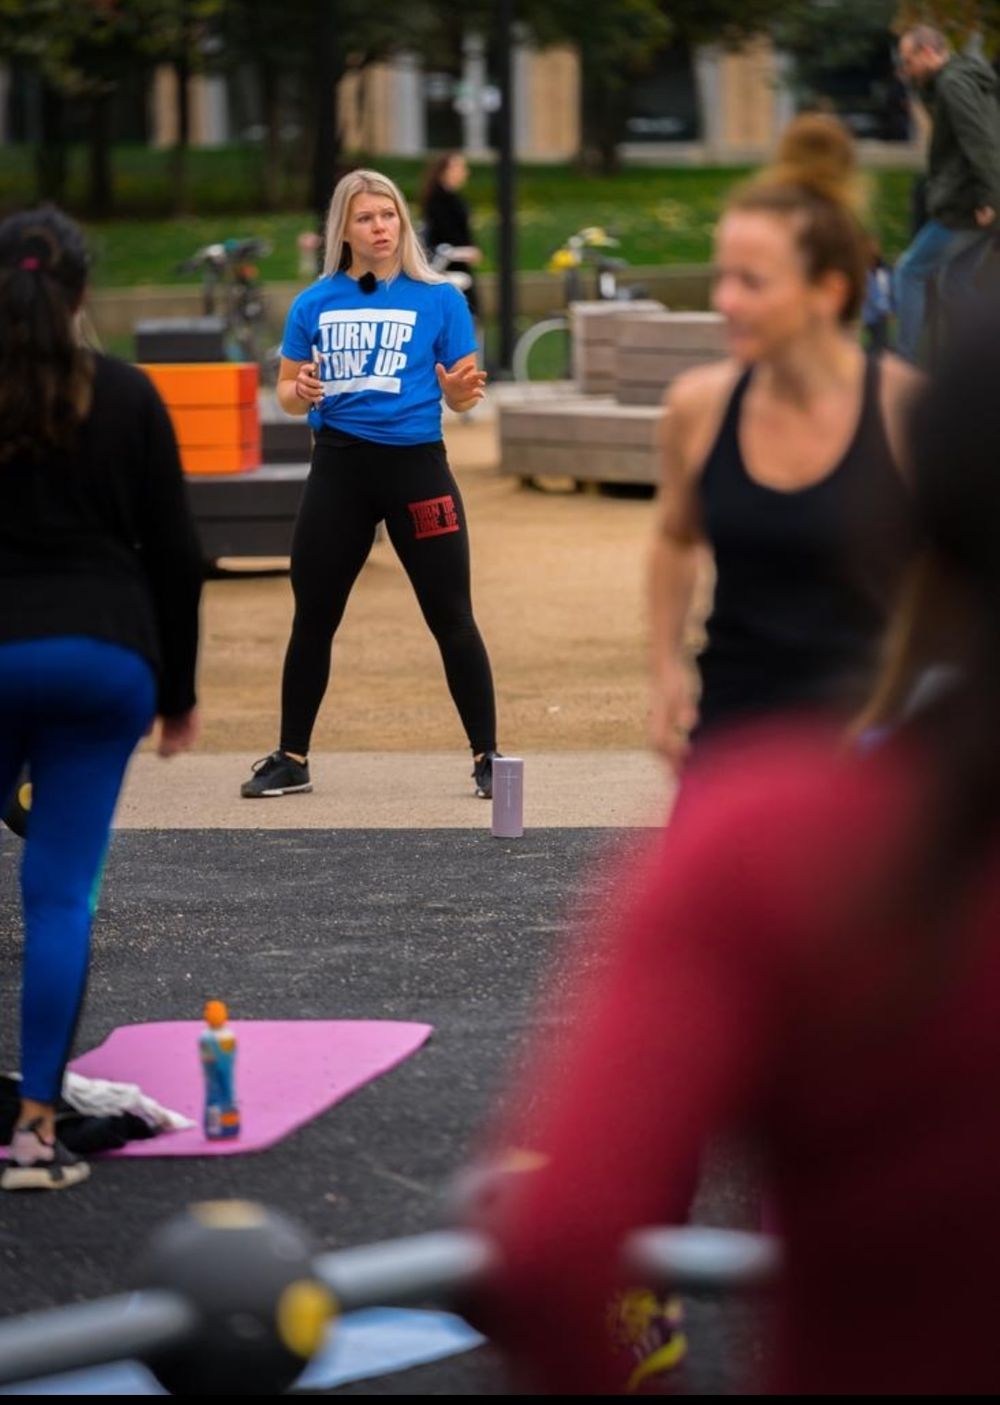 You can still sign up for tomorrow's full body  bootcamp!
Use discount code IGAPRO to get the second class FREE!

SIGN UP HERE https://bua.fit/class/Bvb8rHAIkRVg